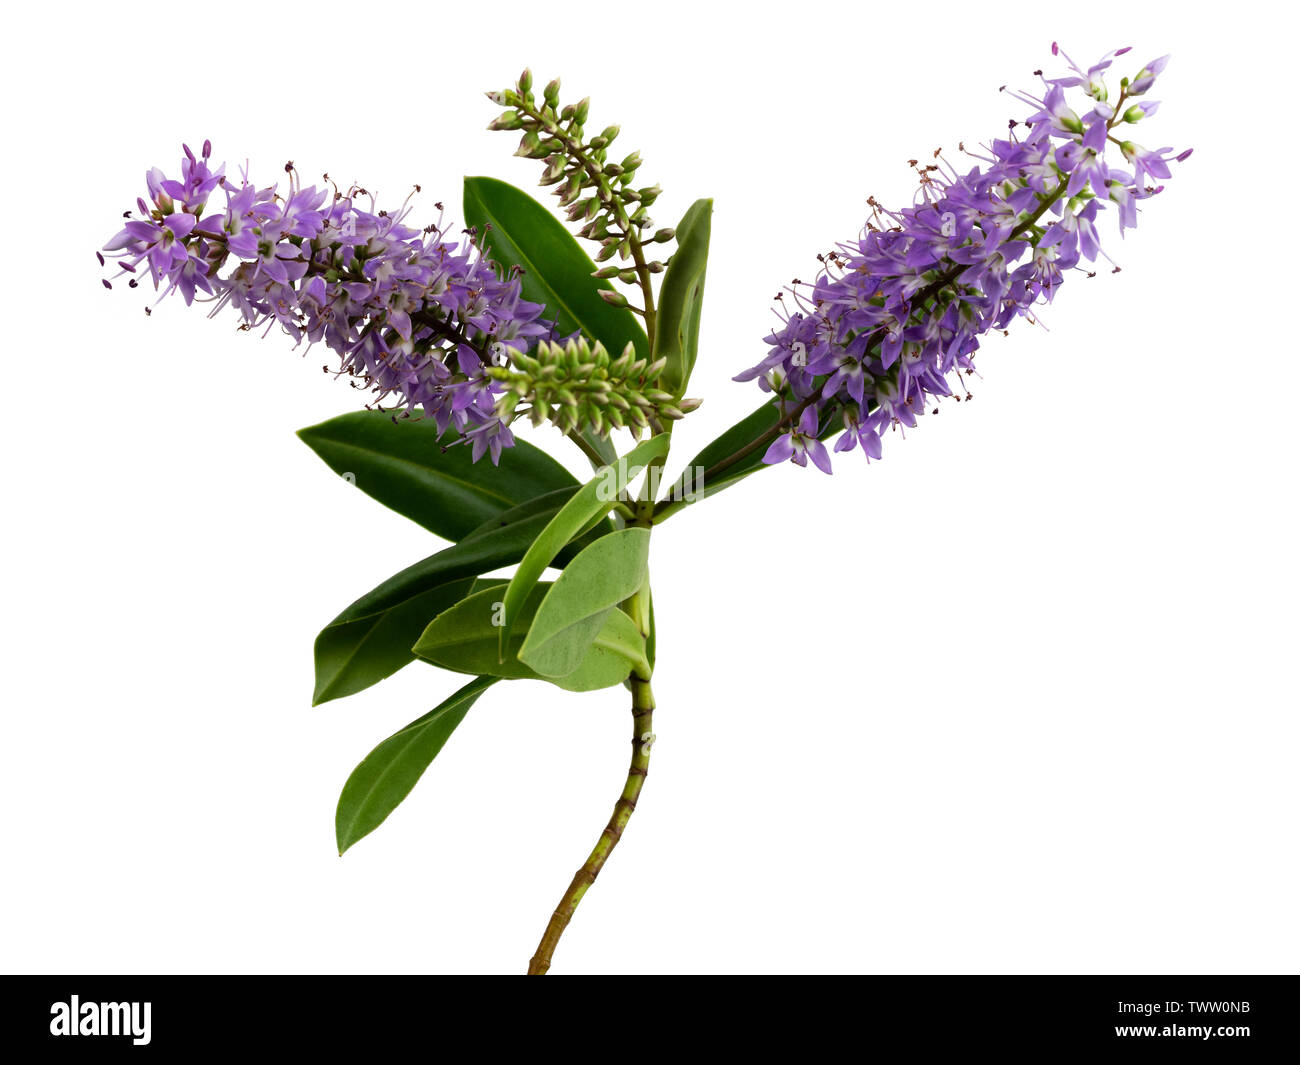 Violet flowers and evergreen foliage of the hardy shrub Hebe 'Midsummer Beauty' on a white background Stock Photo